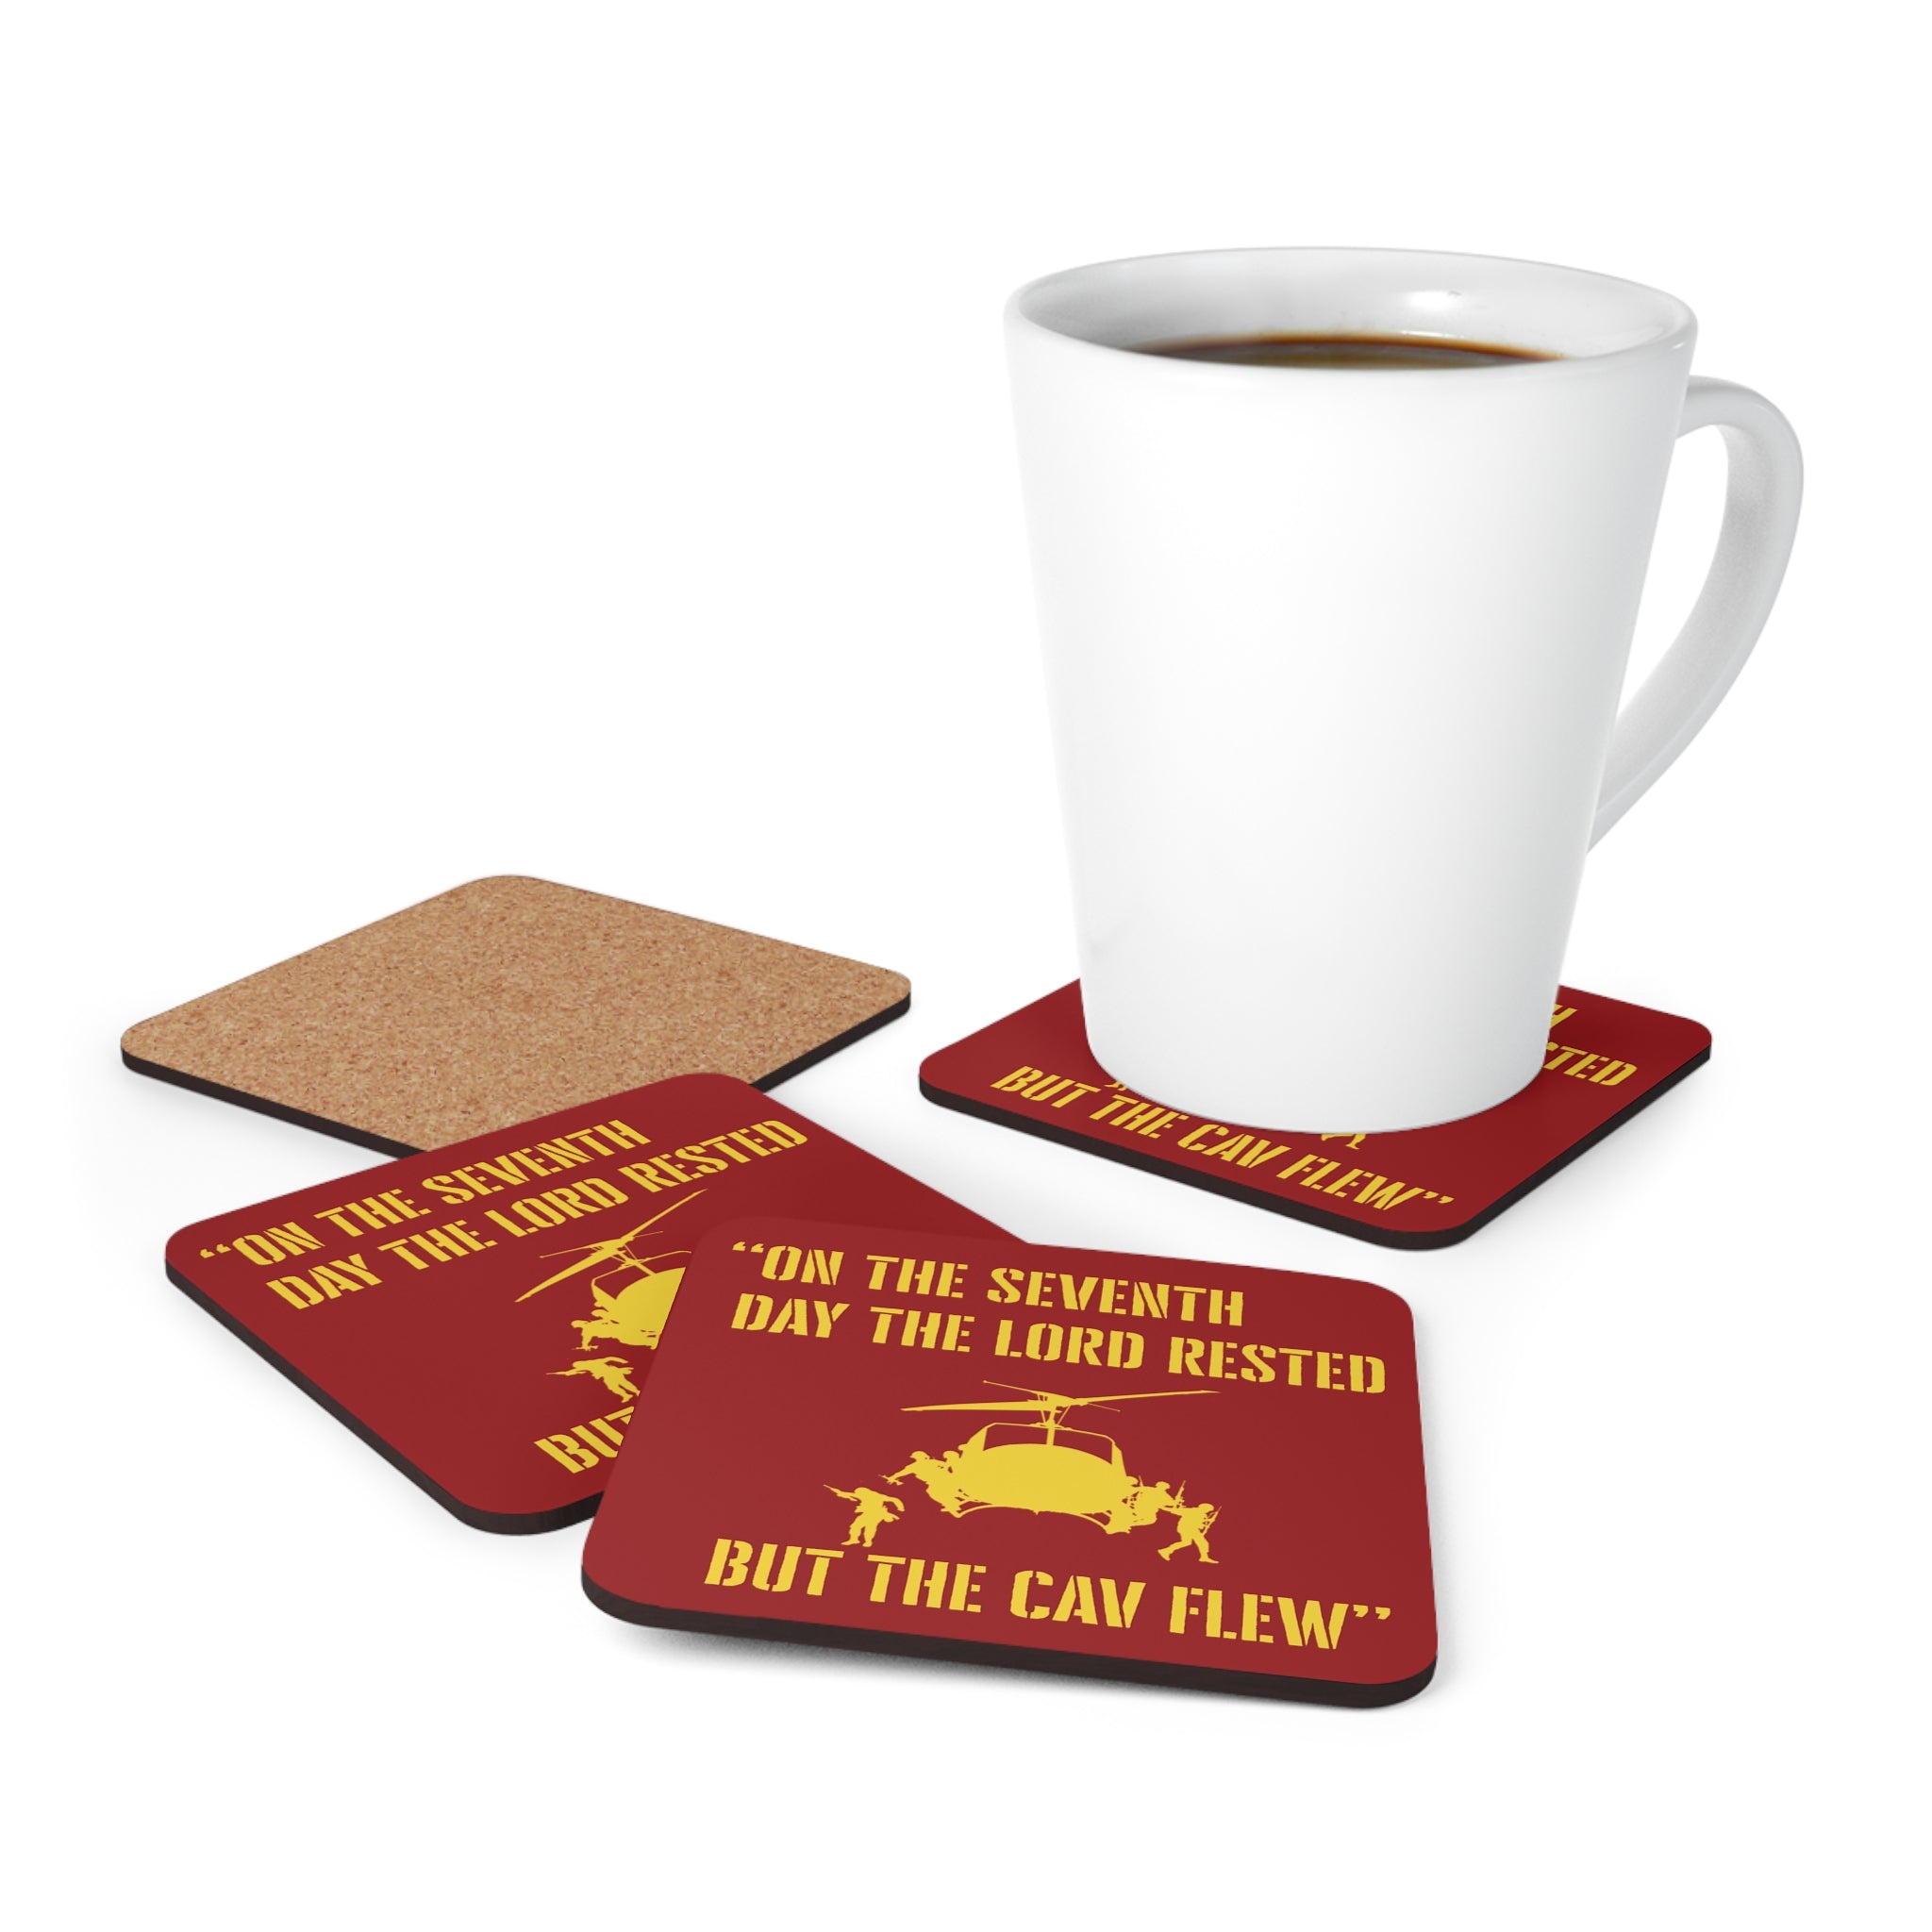 "On the 7th Day The Lord Rested, But The Cav Flew" Corkwood Coaster Set - I Love a Hangar